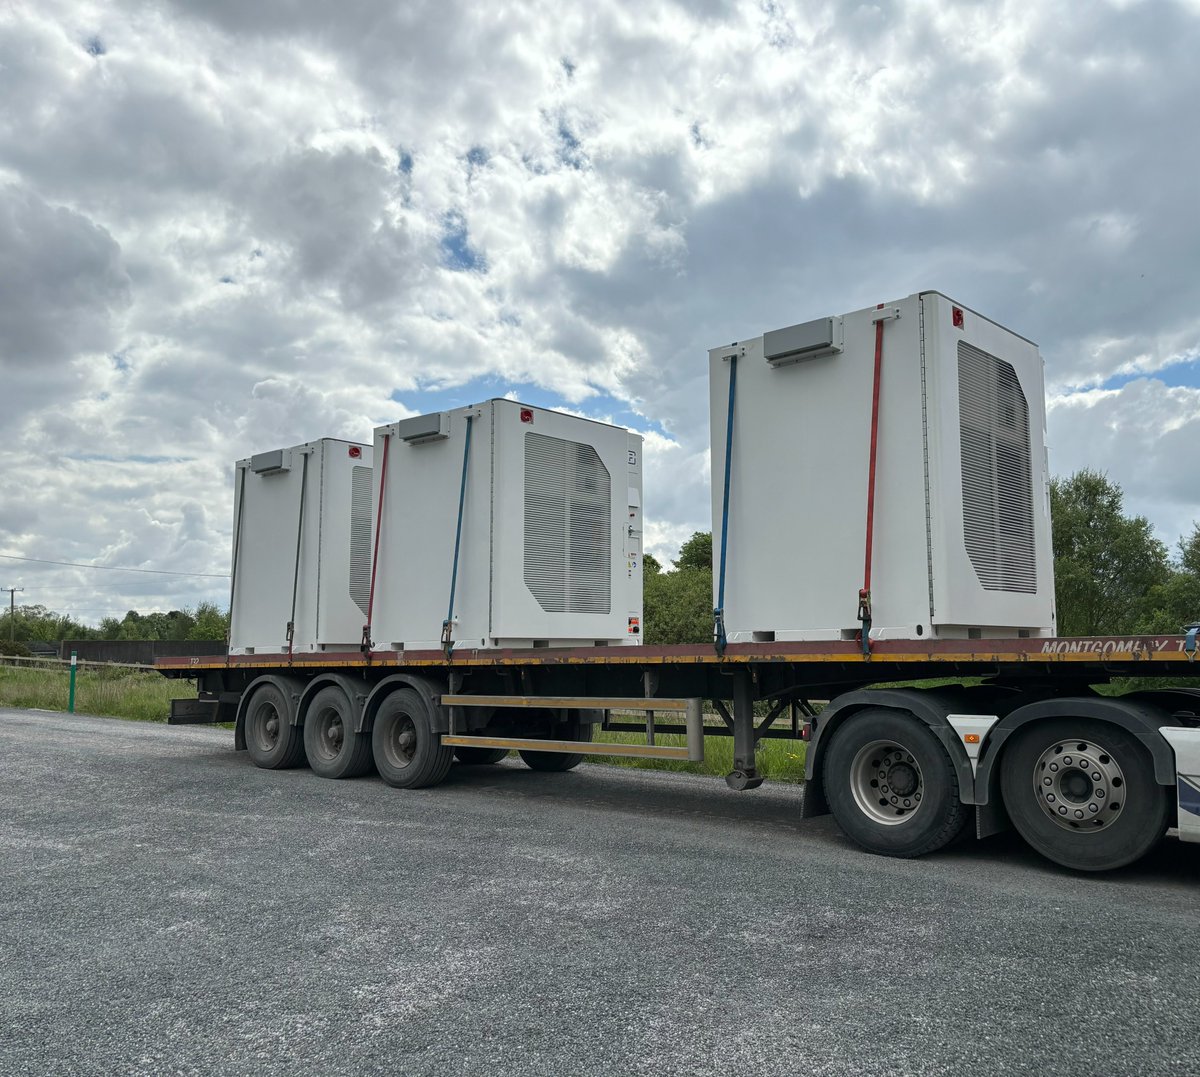 Great to see the batteries rolling into Cloncreen BESS! They're not small. 🧐 @greenparty_ie @offalycoco #windpower #renewableenergy #batterystorage